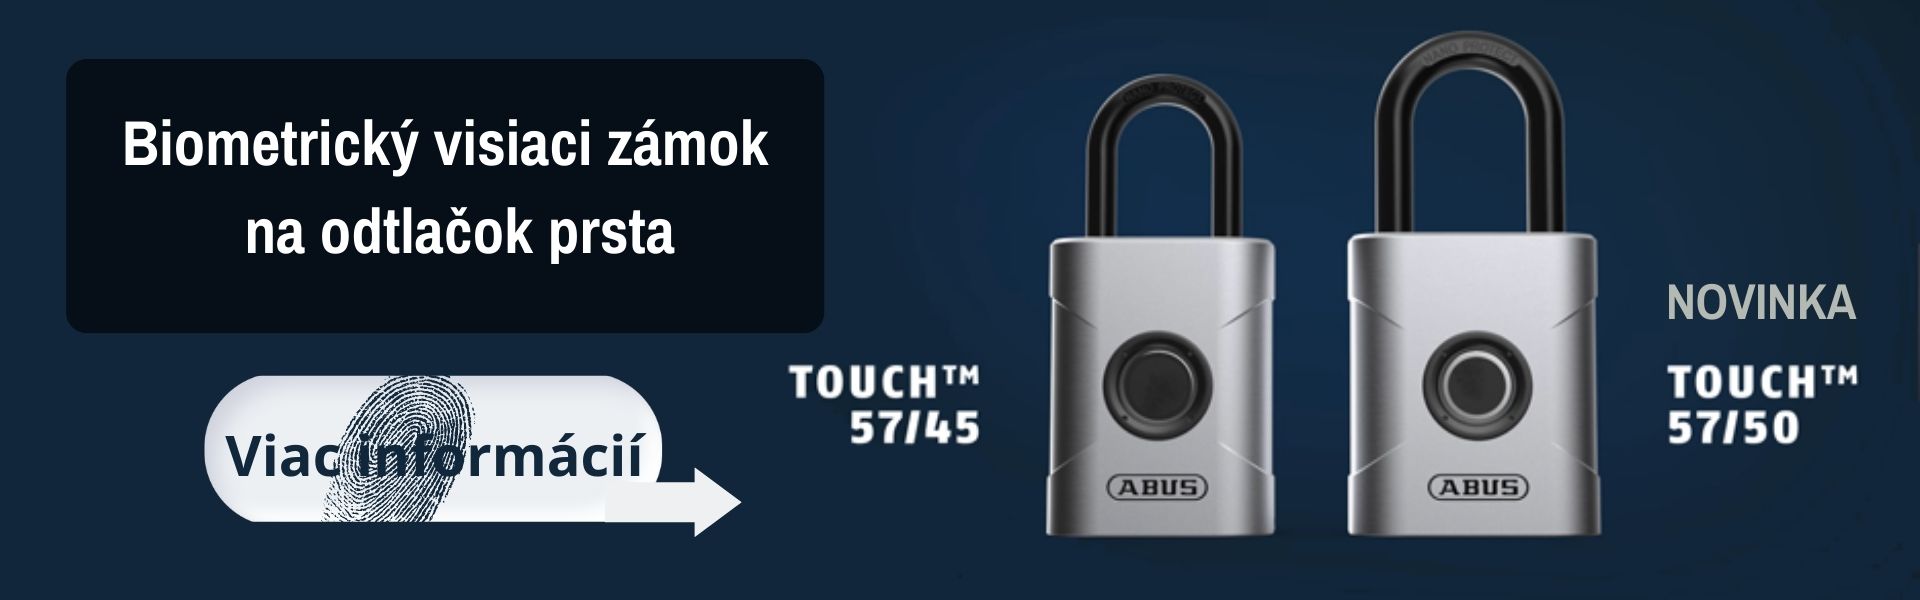 Abus touch pc